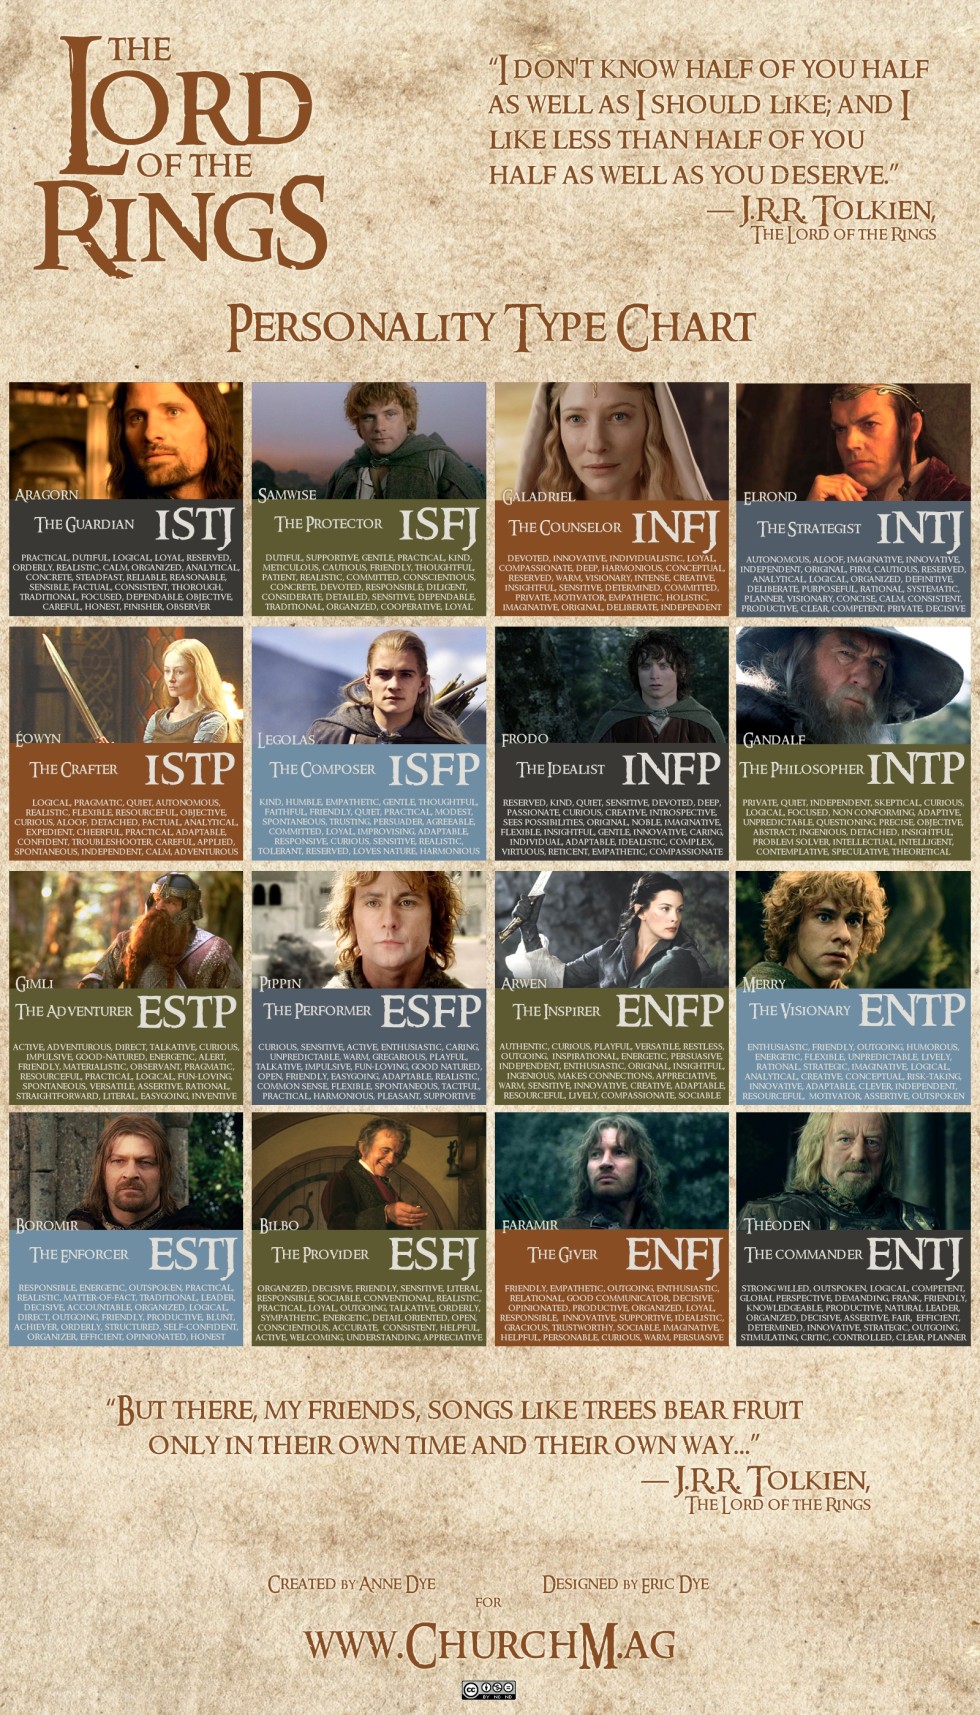 The Myers-Briggs Types of 202 Fictional Characters